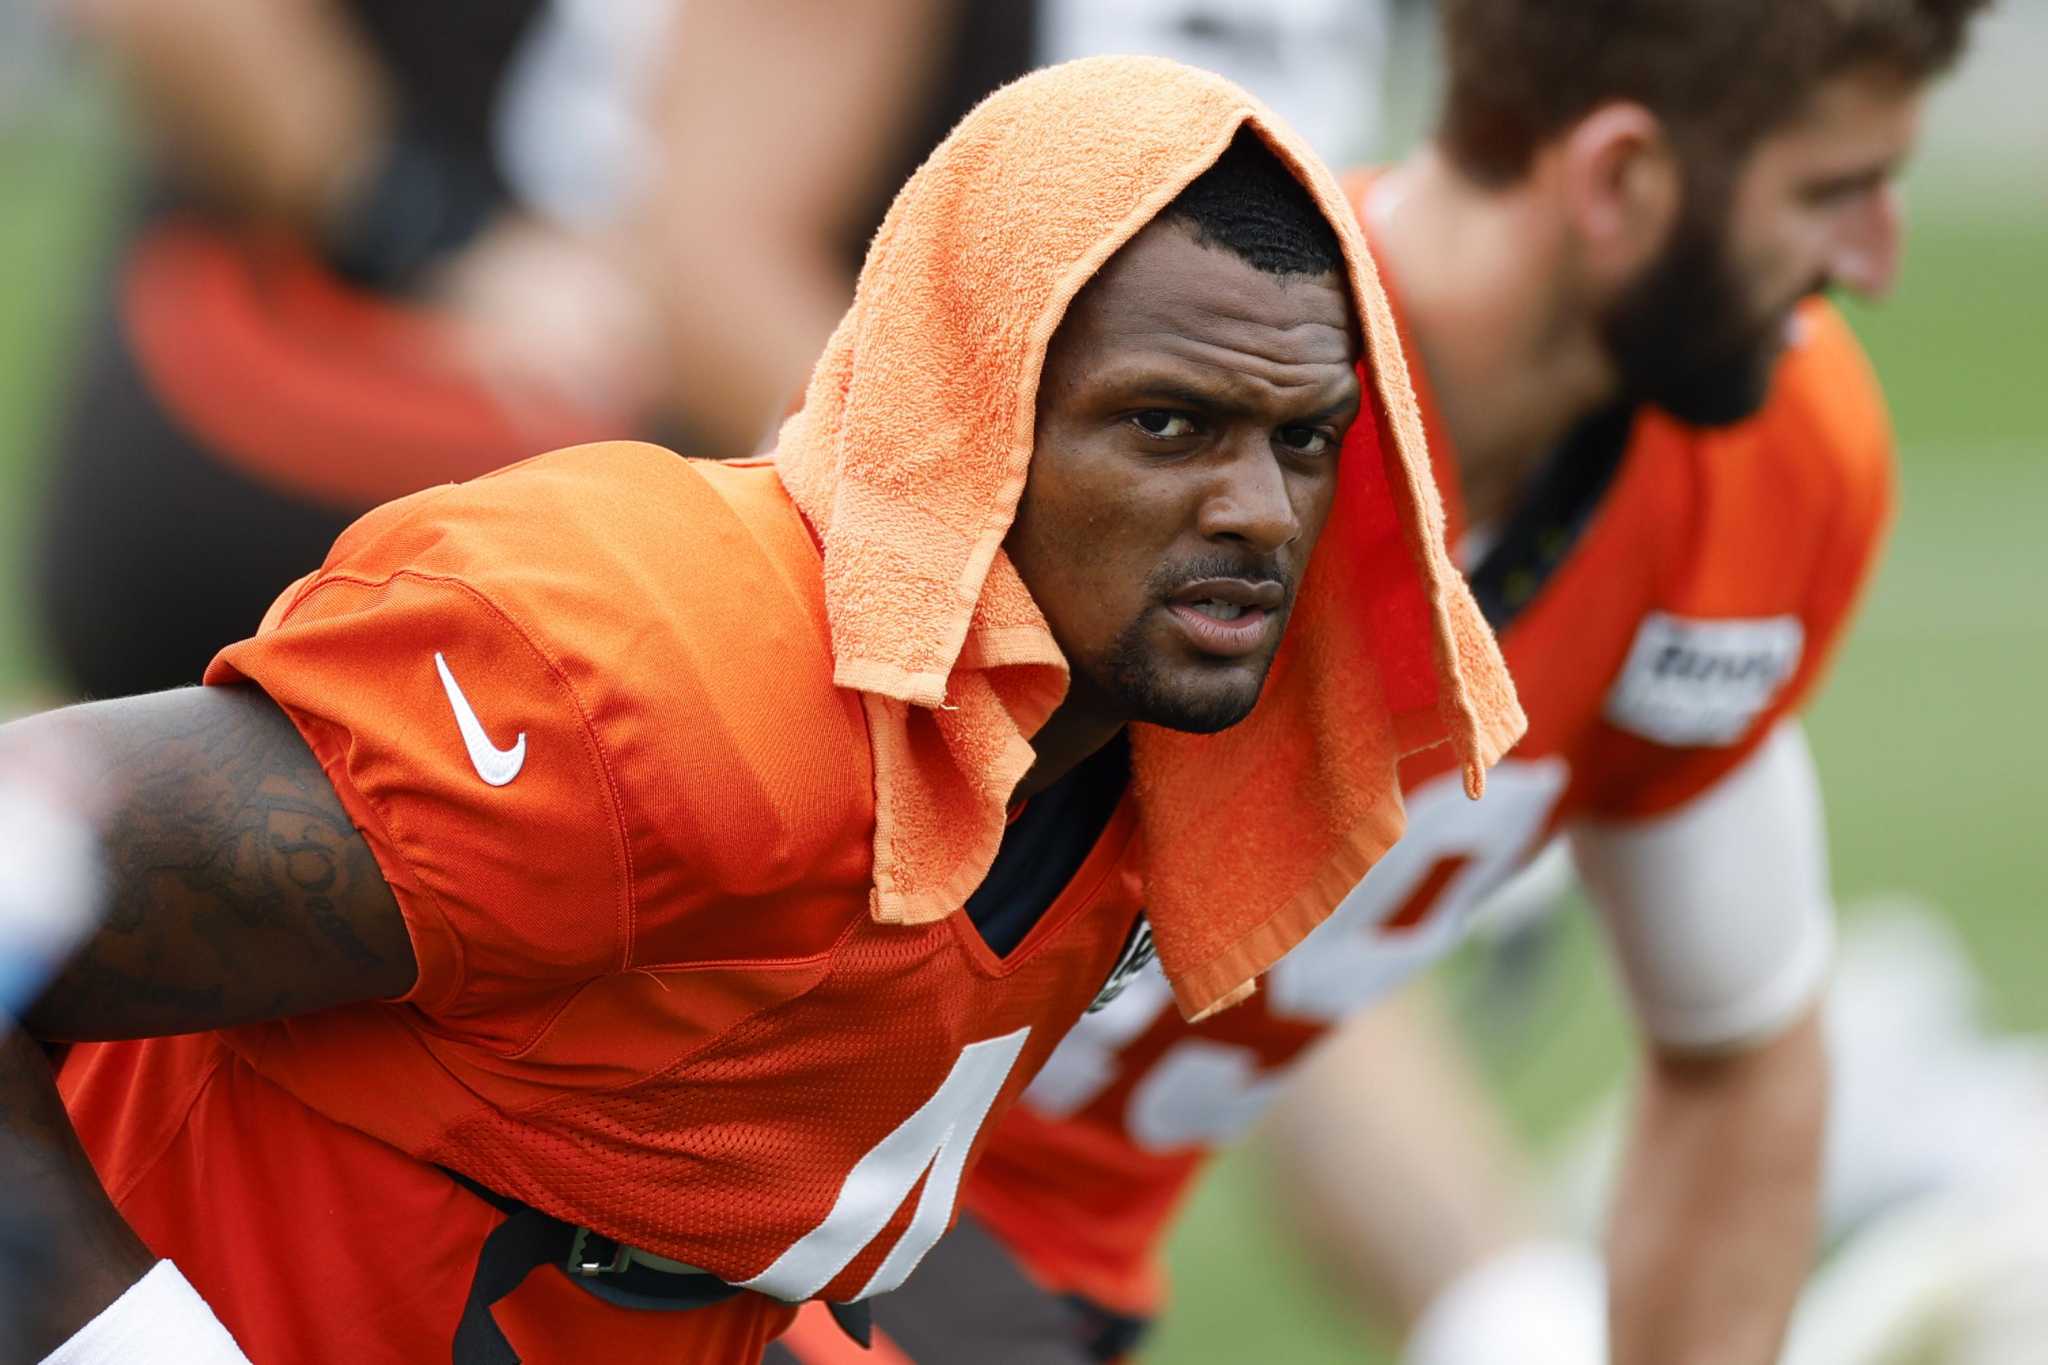 NFL will not discipline Browns QB Deshaun Watson for contact with